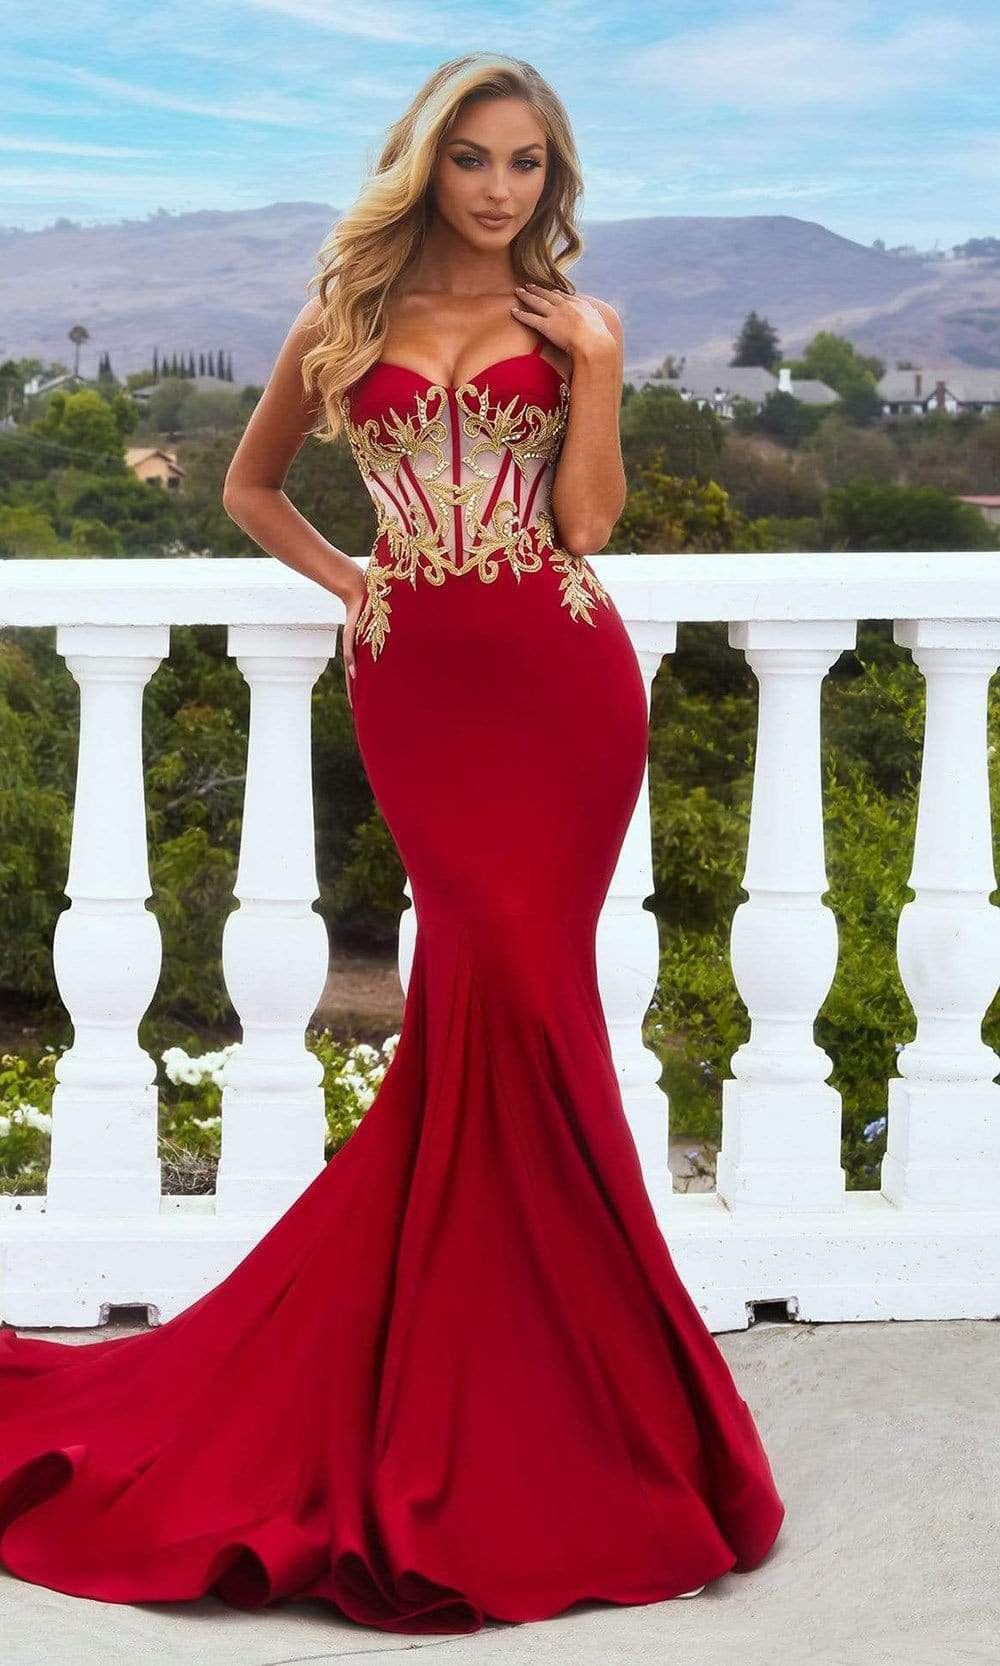 Portia and Scarlett - PS22363 Sweetheart Lace Appliqued Long Dress Prom Dresses 0 / Red